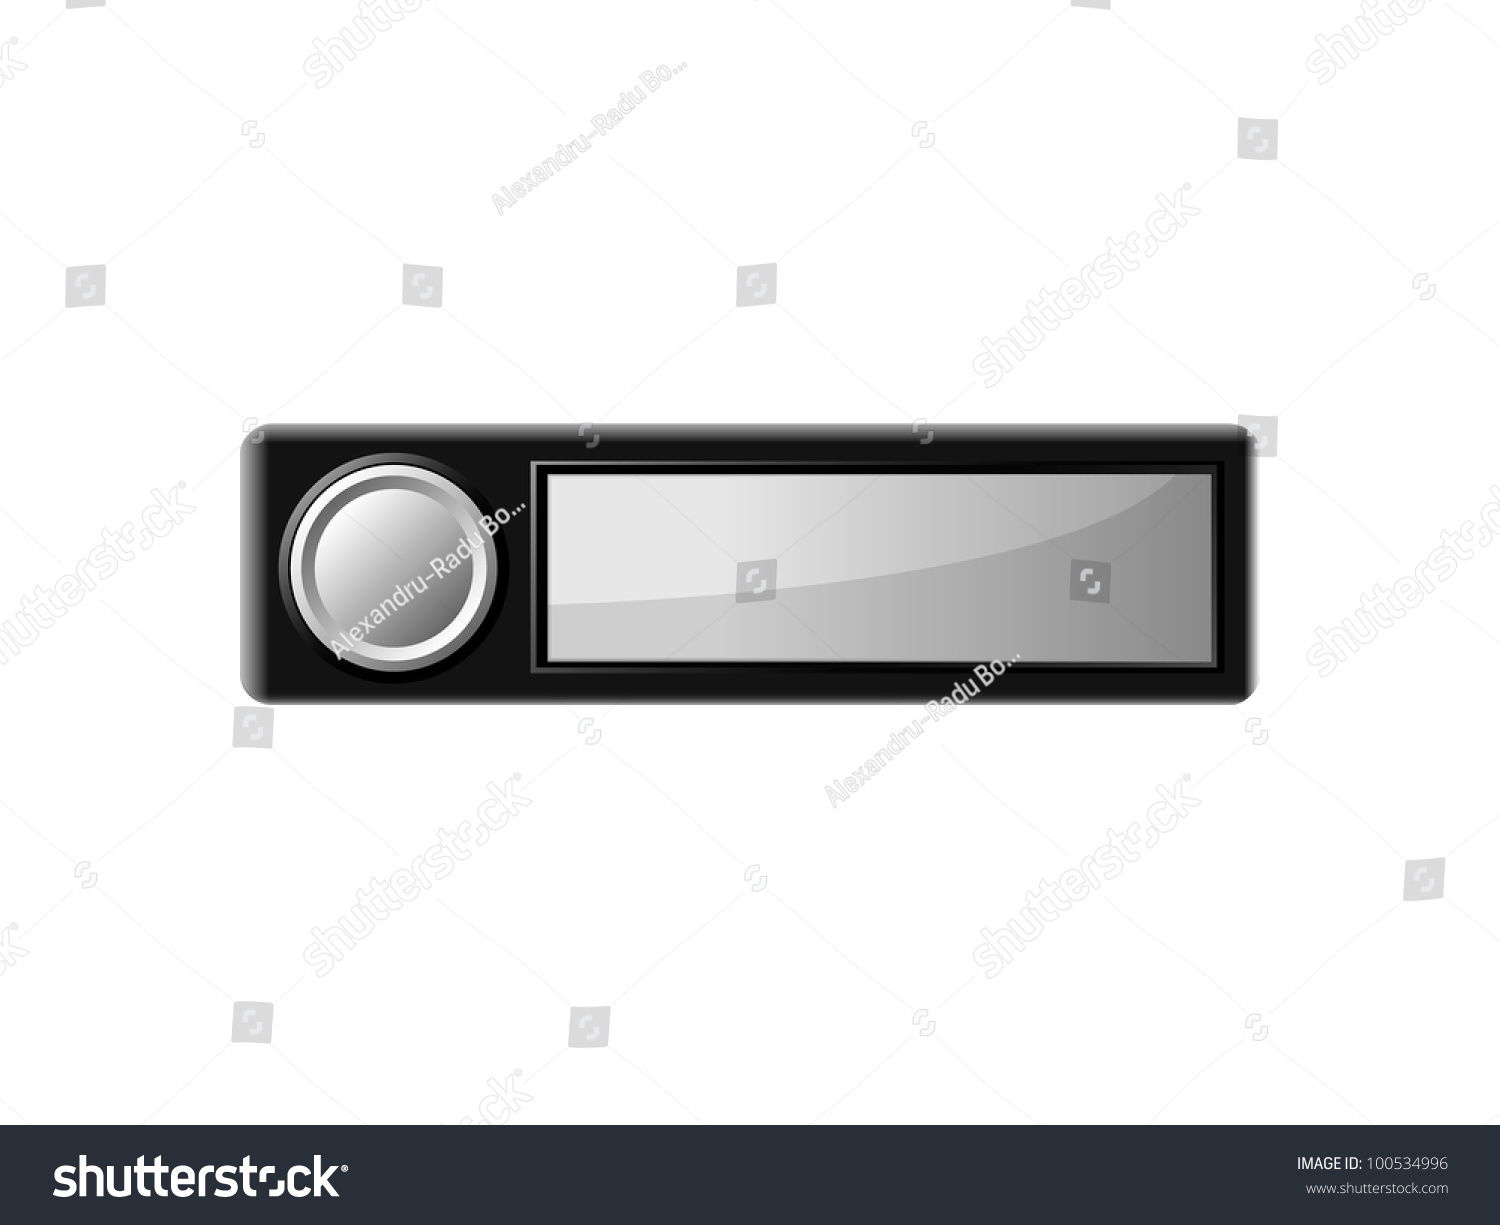 Black And White Door Bell Button With Space For Writing On Label Stock ...